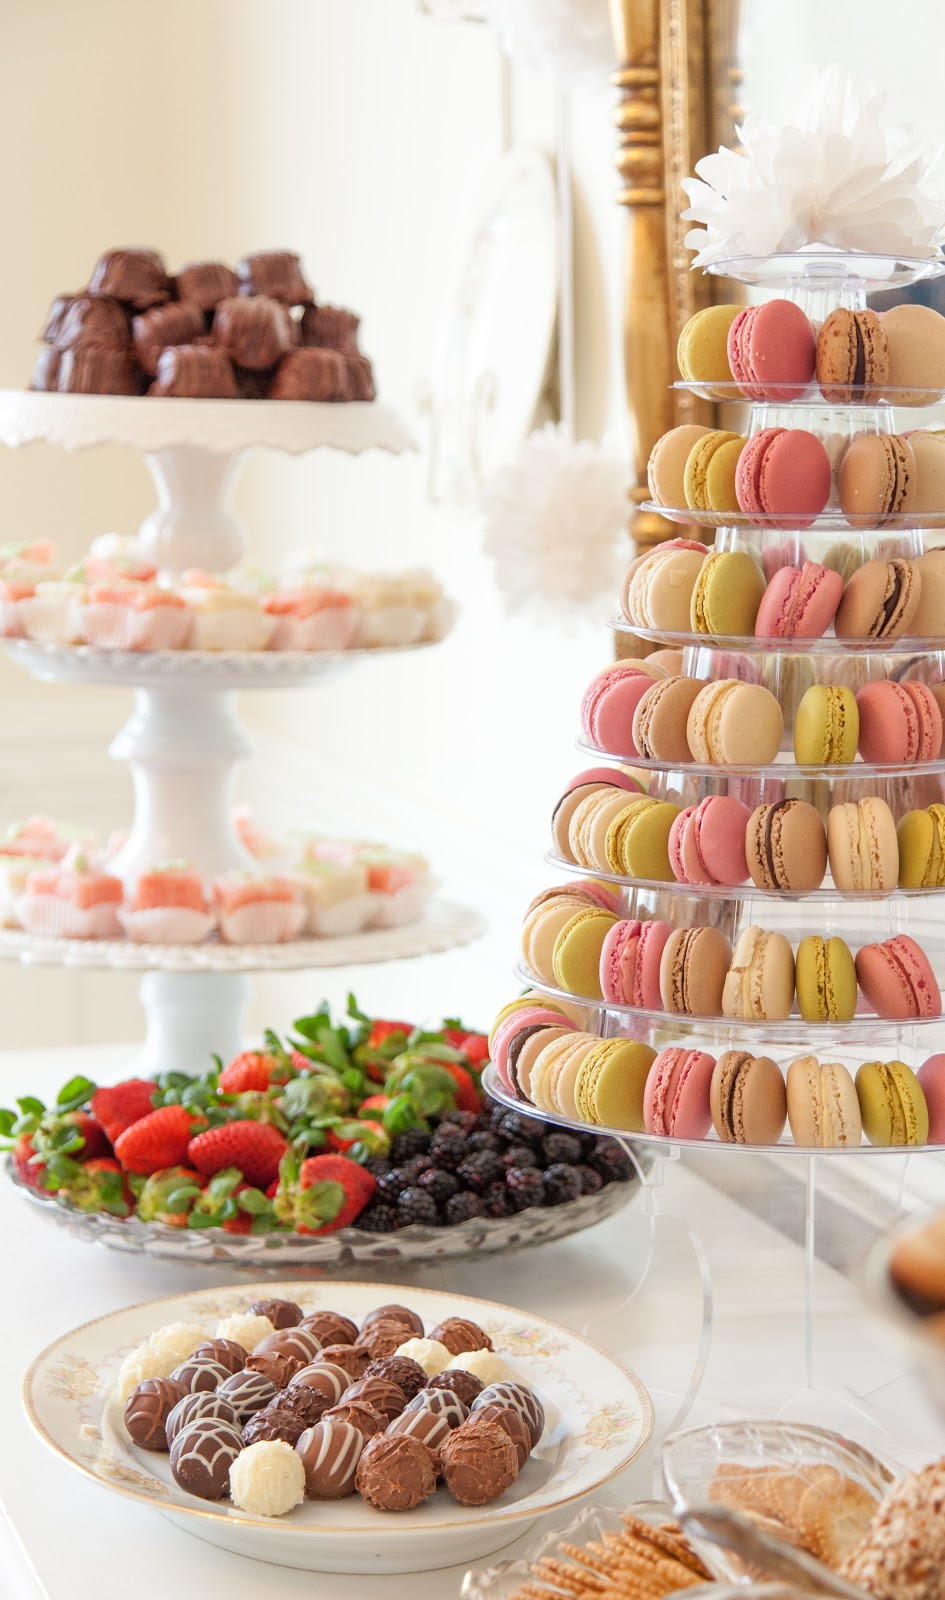 French Tea Party Ideas
 A Little Loveliness Emma s French Patisserie Tea Party Menu